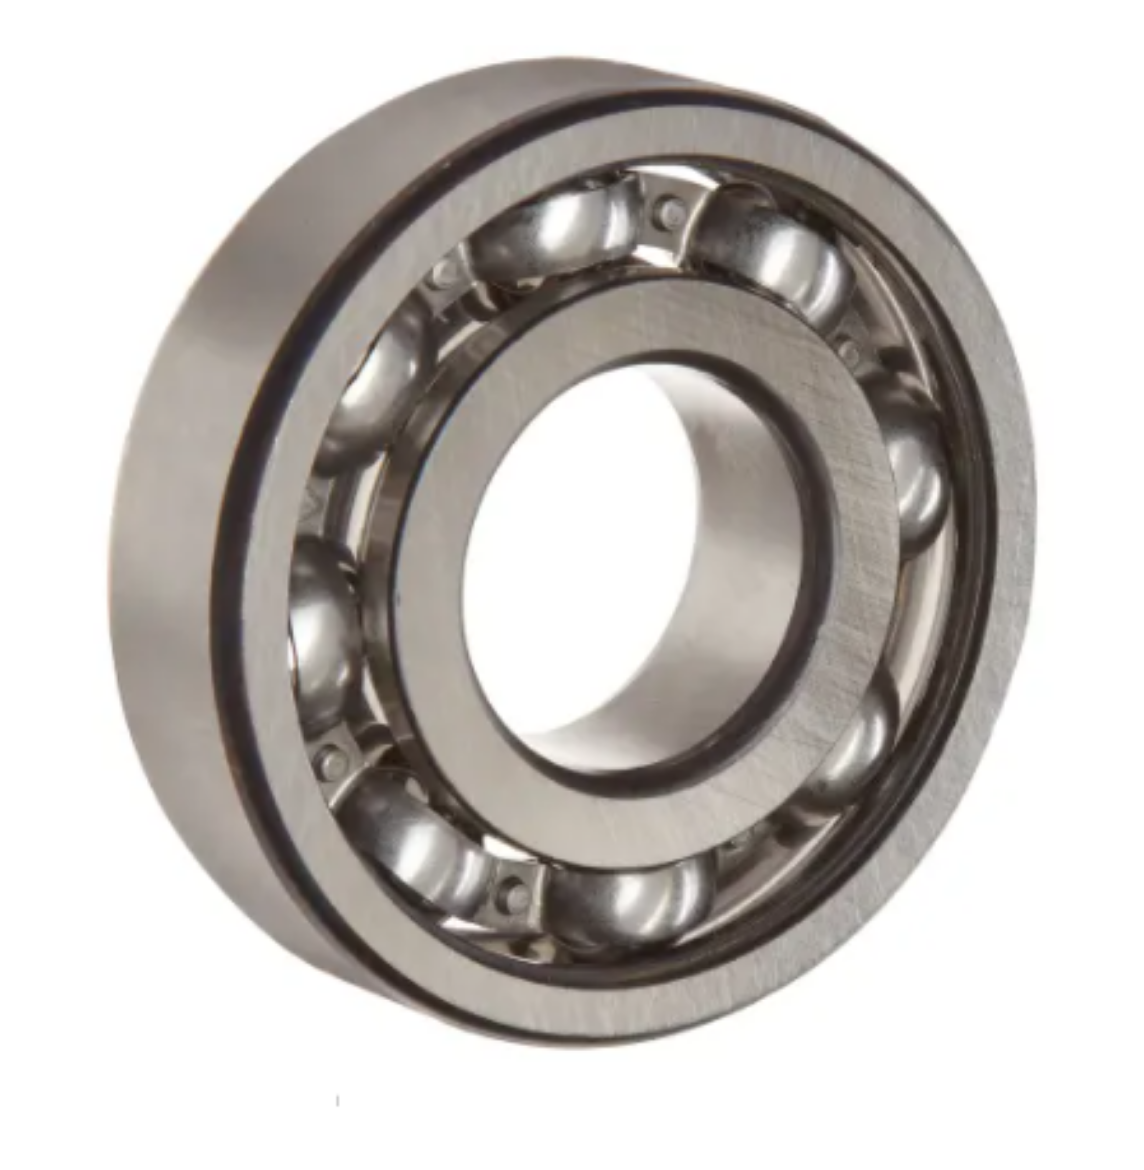 Picture of GB.10790.S07 SNR BRG SNR SPEC GB10790S05 - SINGLE DEEP GROVE BEARING 30X60X37